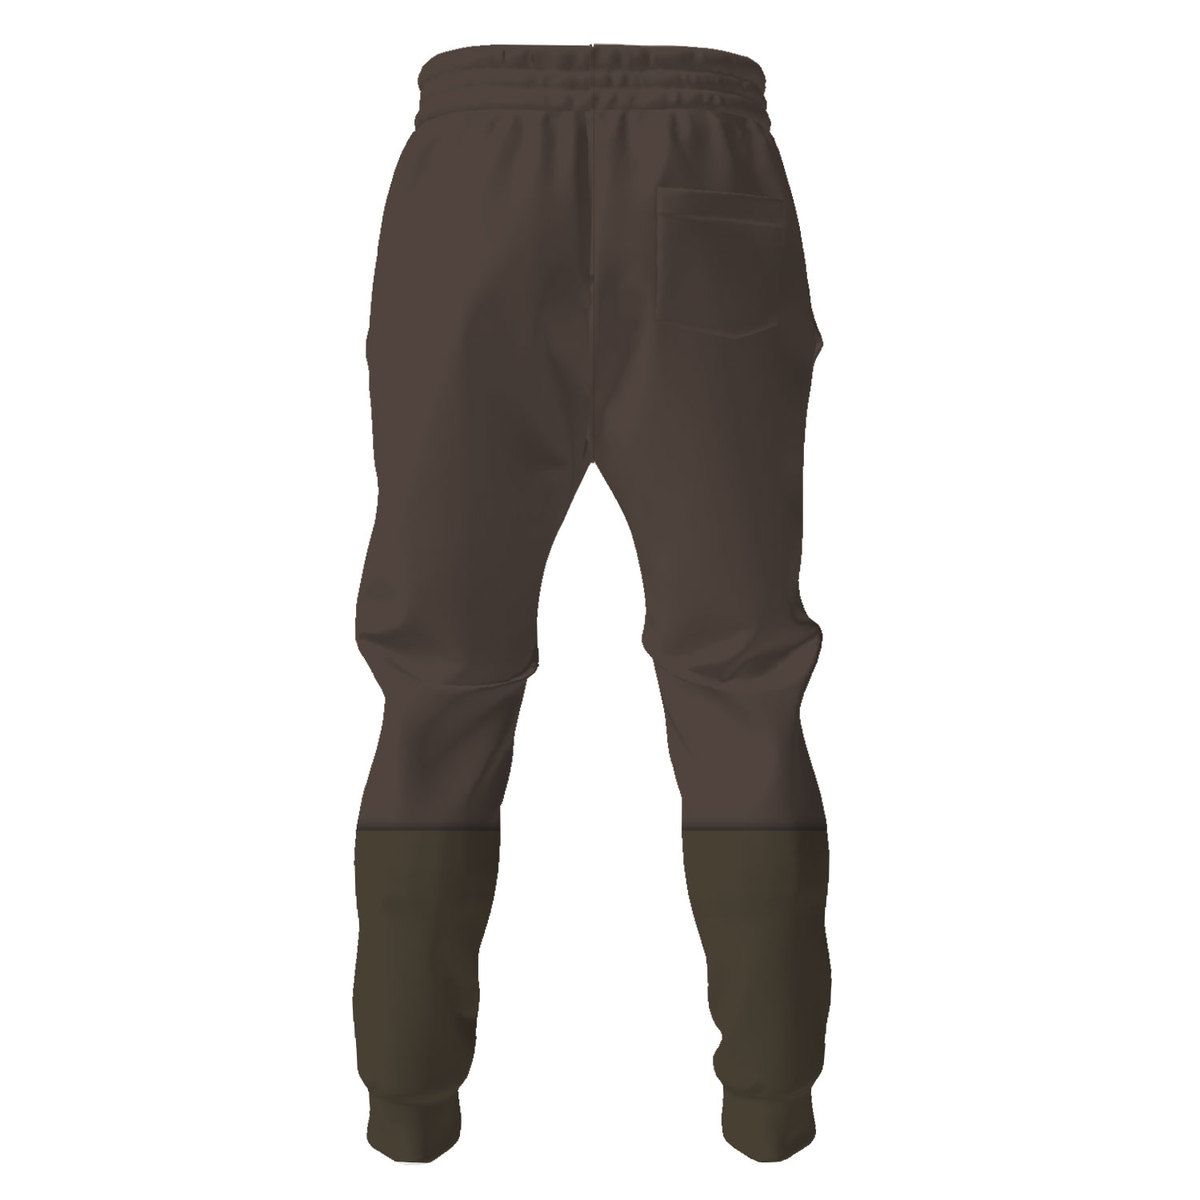 Soldier TF2 pants